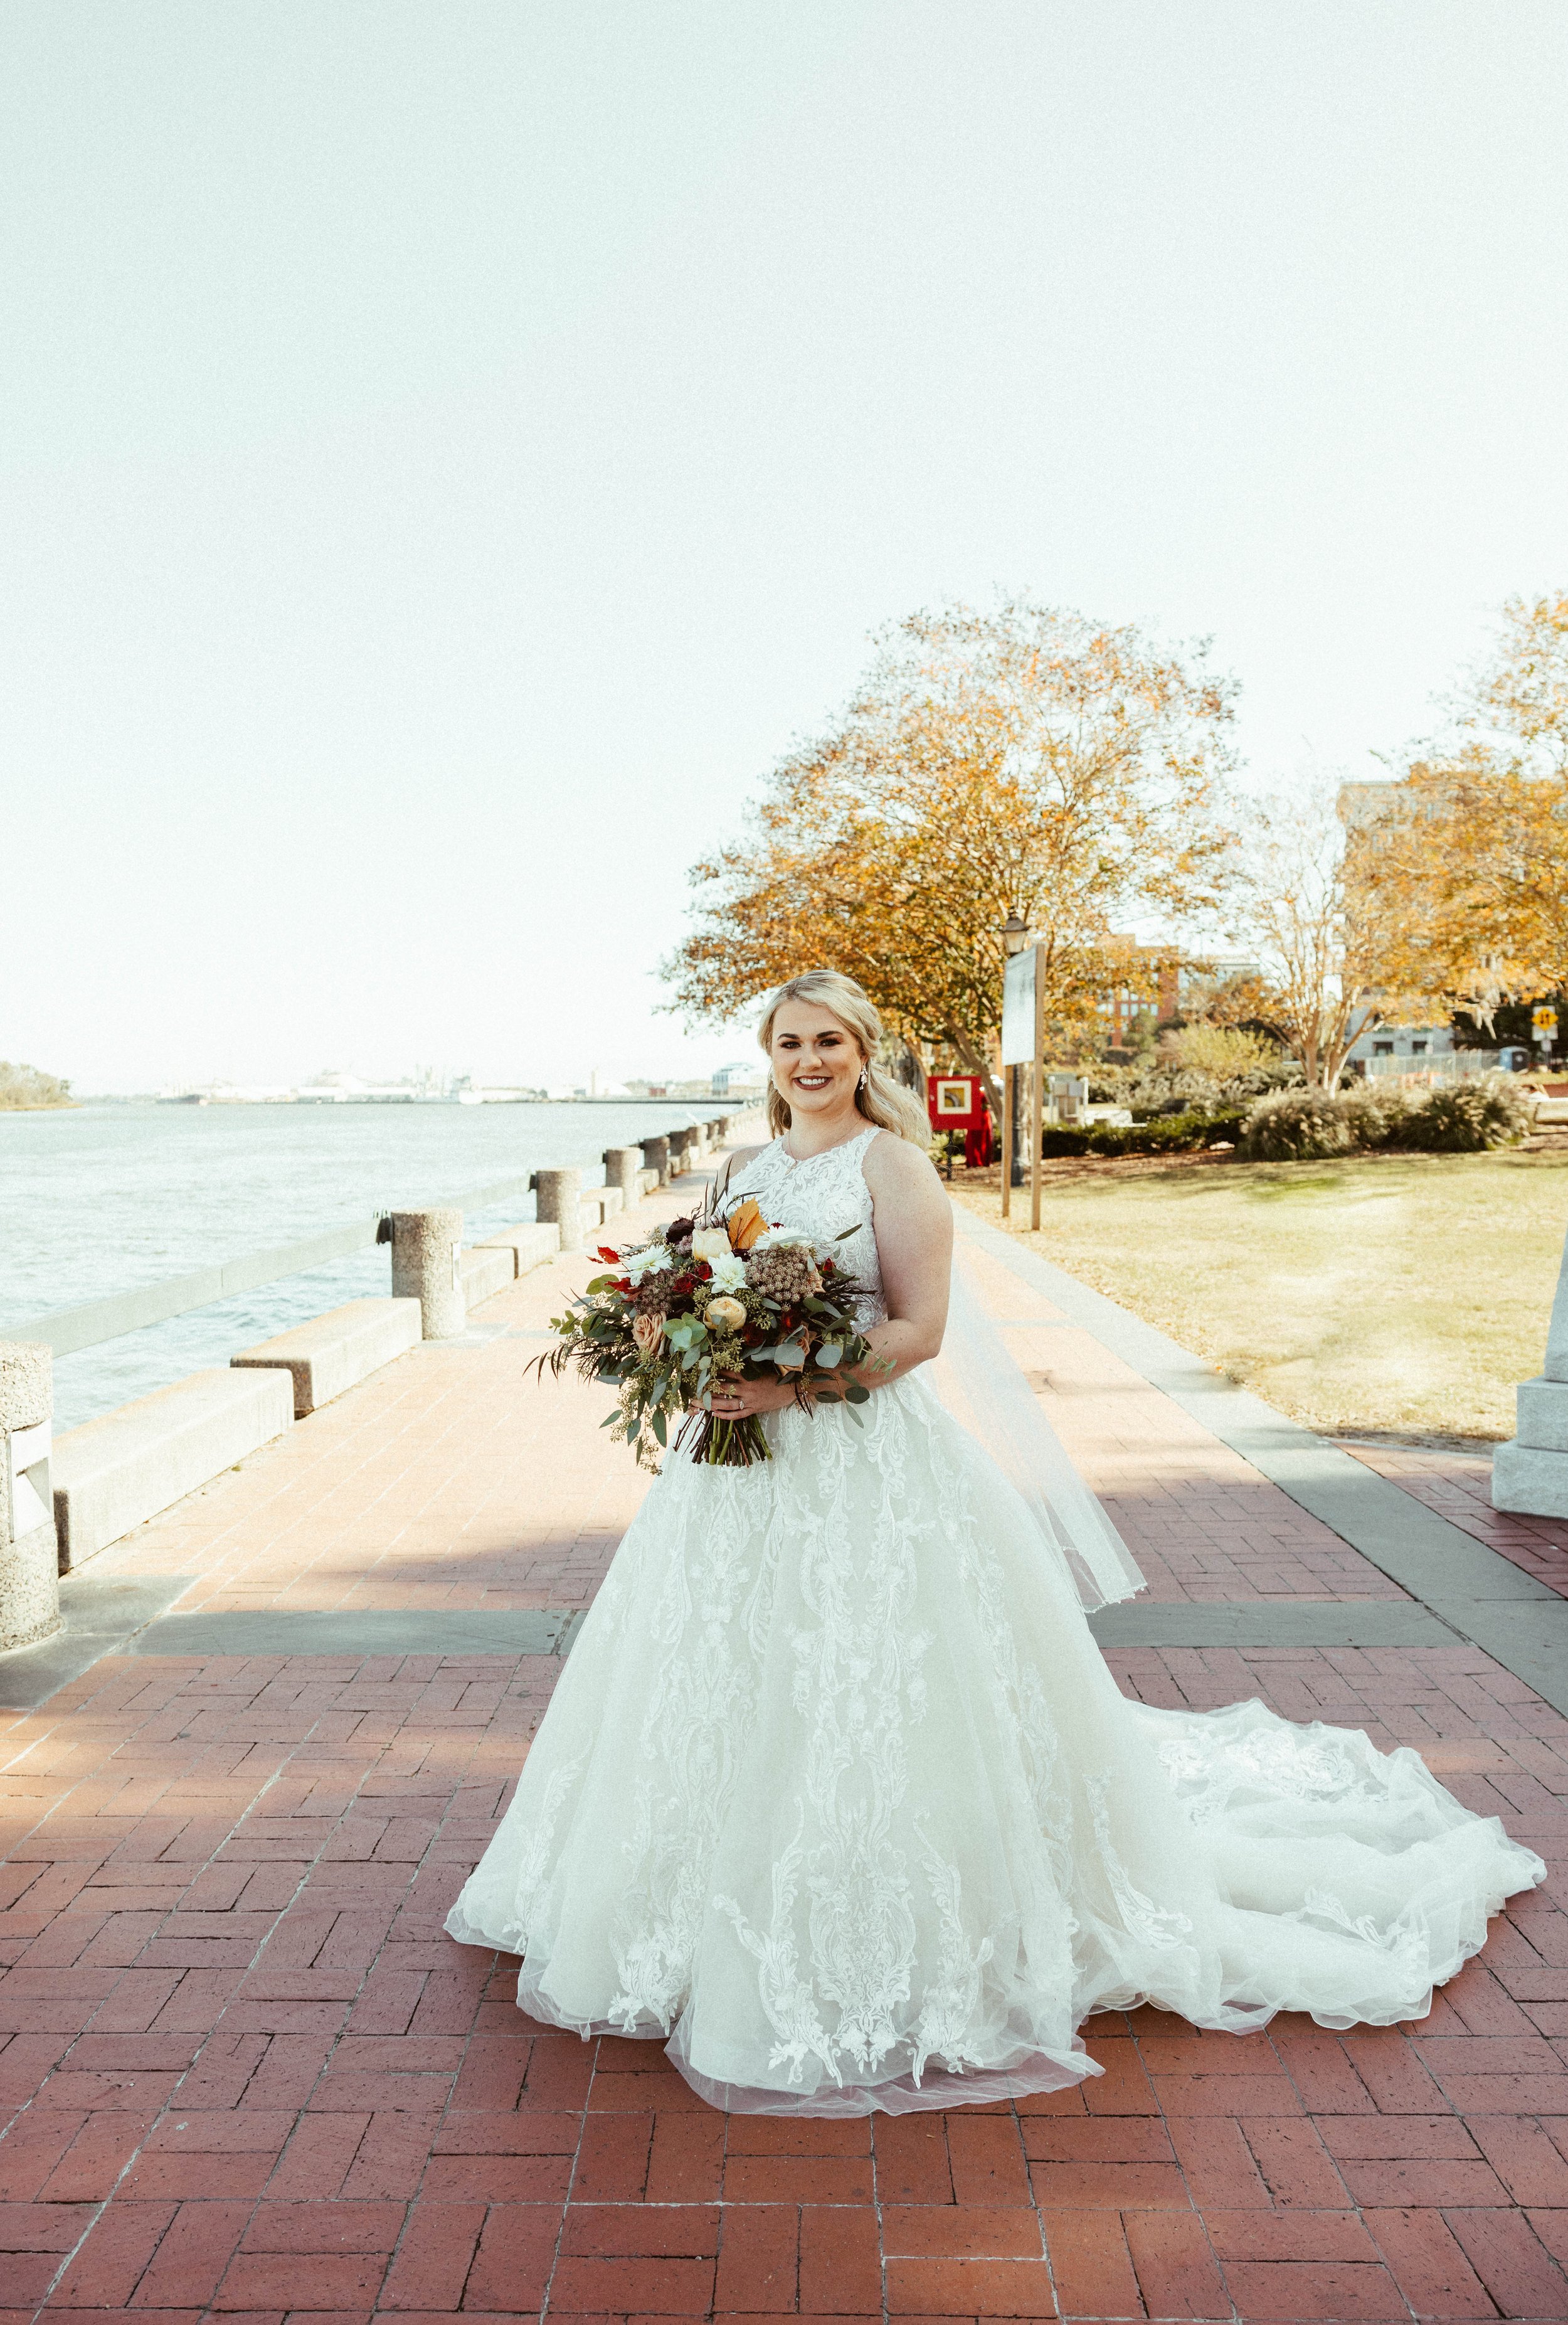 Ivory-and-beau-bride-ansley-bought-sparkly-and-traditional-highneck-ballgown-at-savannah-bridal-shop-gets-married-at-cathedral-with-the-help-of-ivory-and-beau-who-created-floral-peices-for-the-ceremony-and-reception-in-their-savannah-florwer-shop-29.jpg